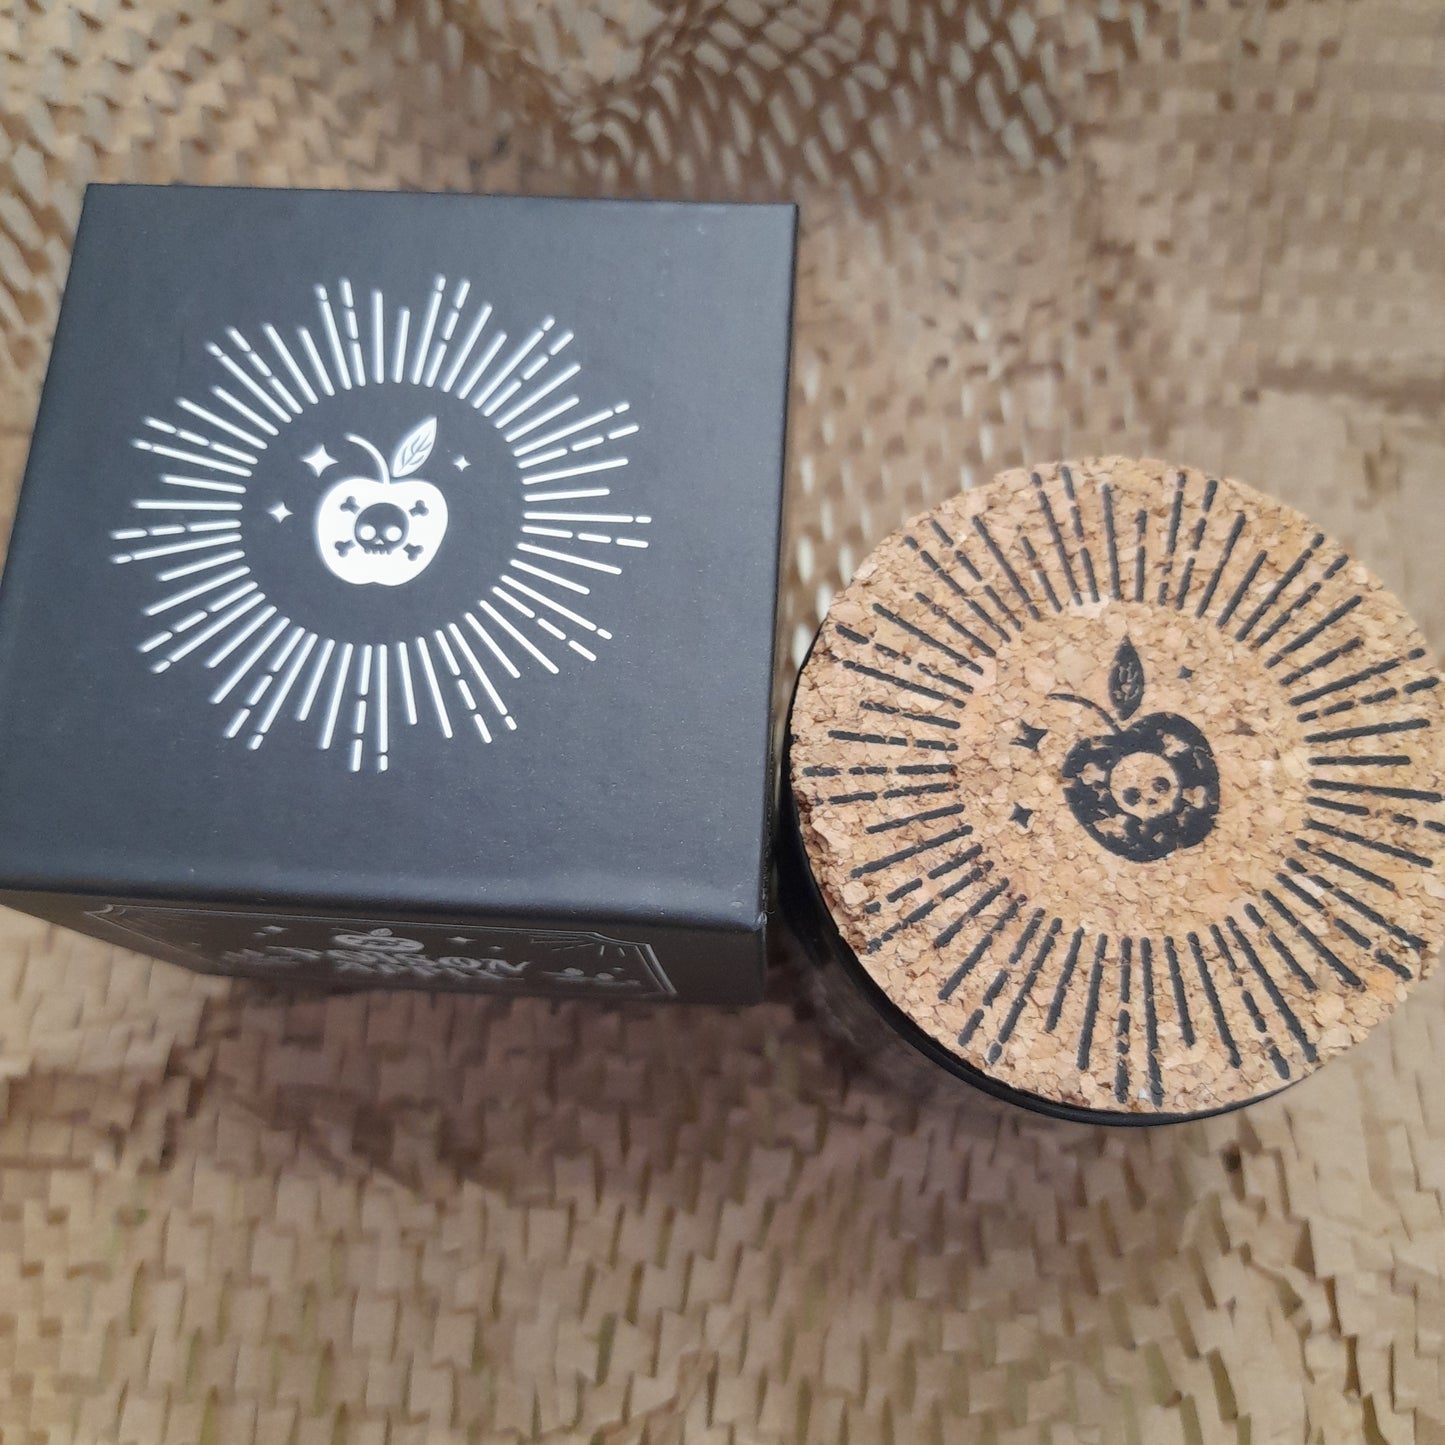 Boxed candles